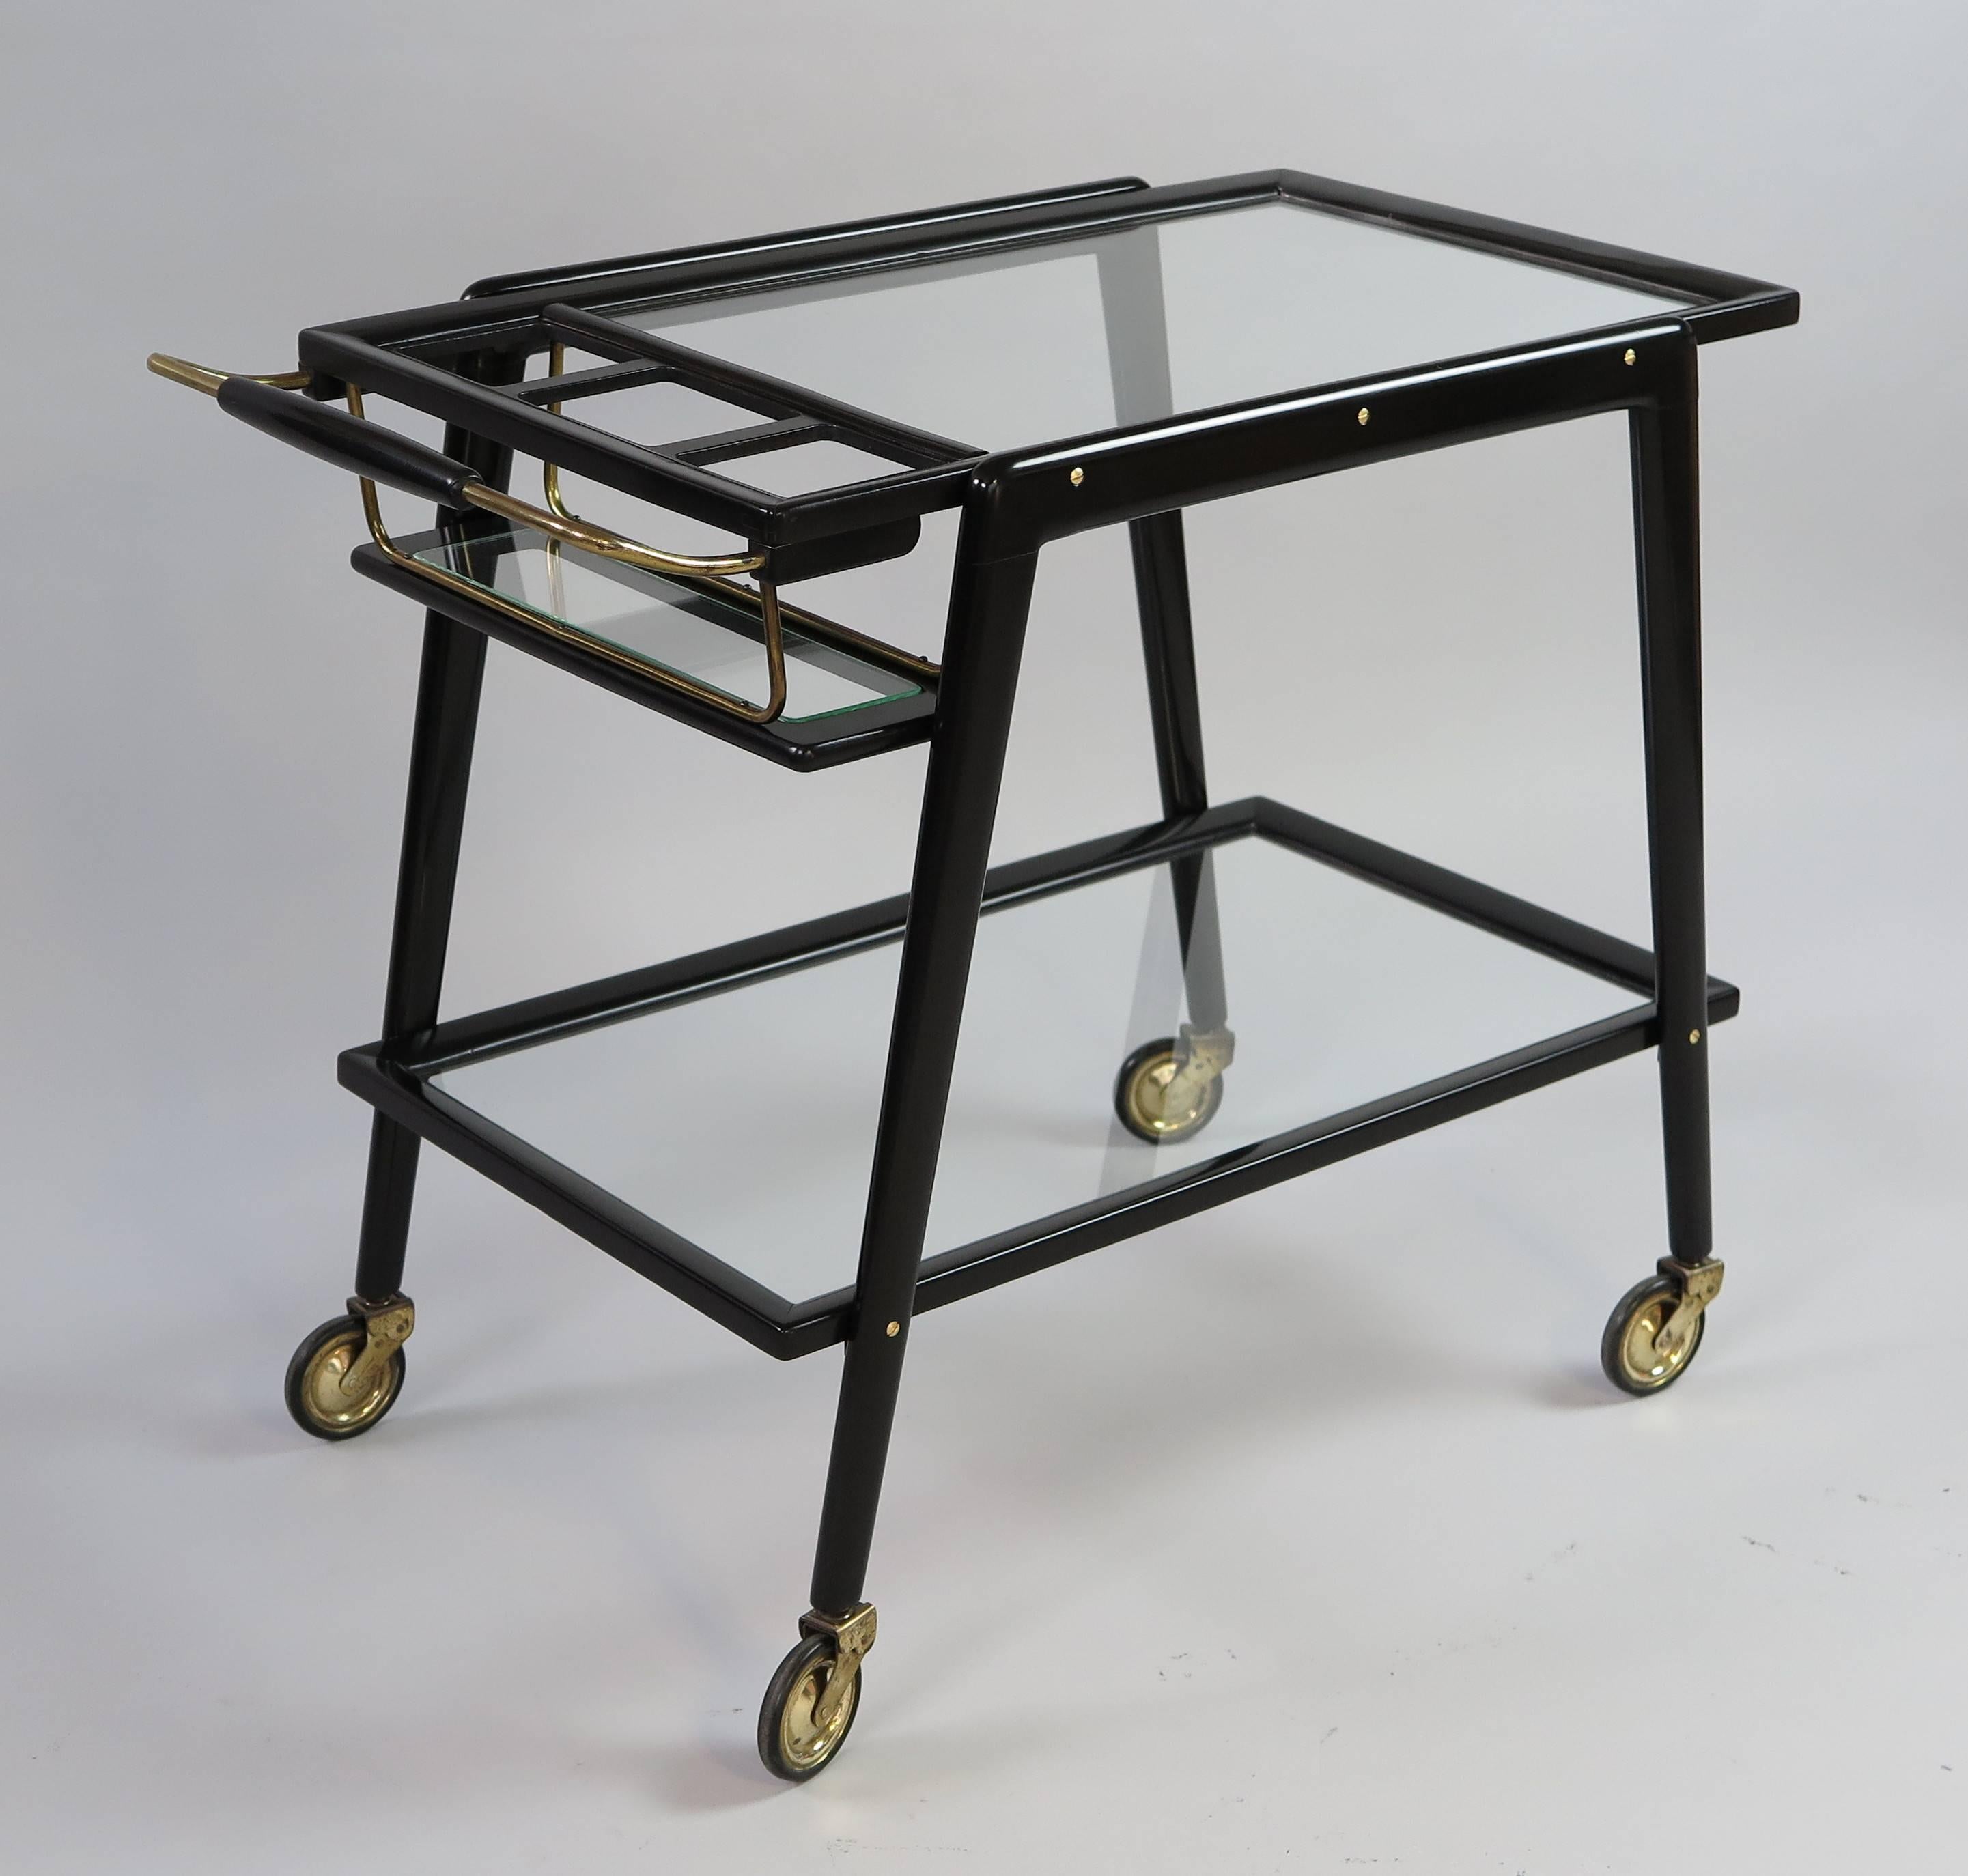 Bar trolley with bottle holder, black lacquered wood, brass, glass shelves,
manufactured in Italy in the 1950s, attributed to Cesare Lacca.